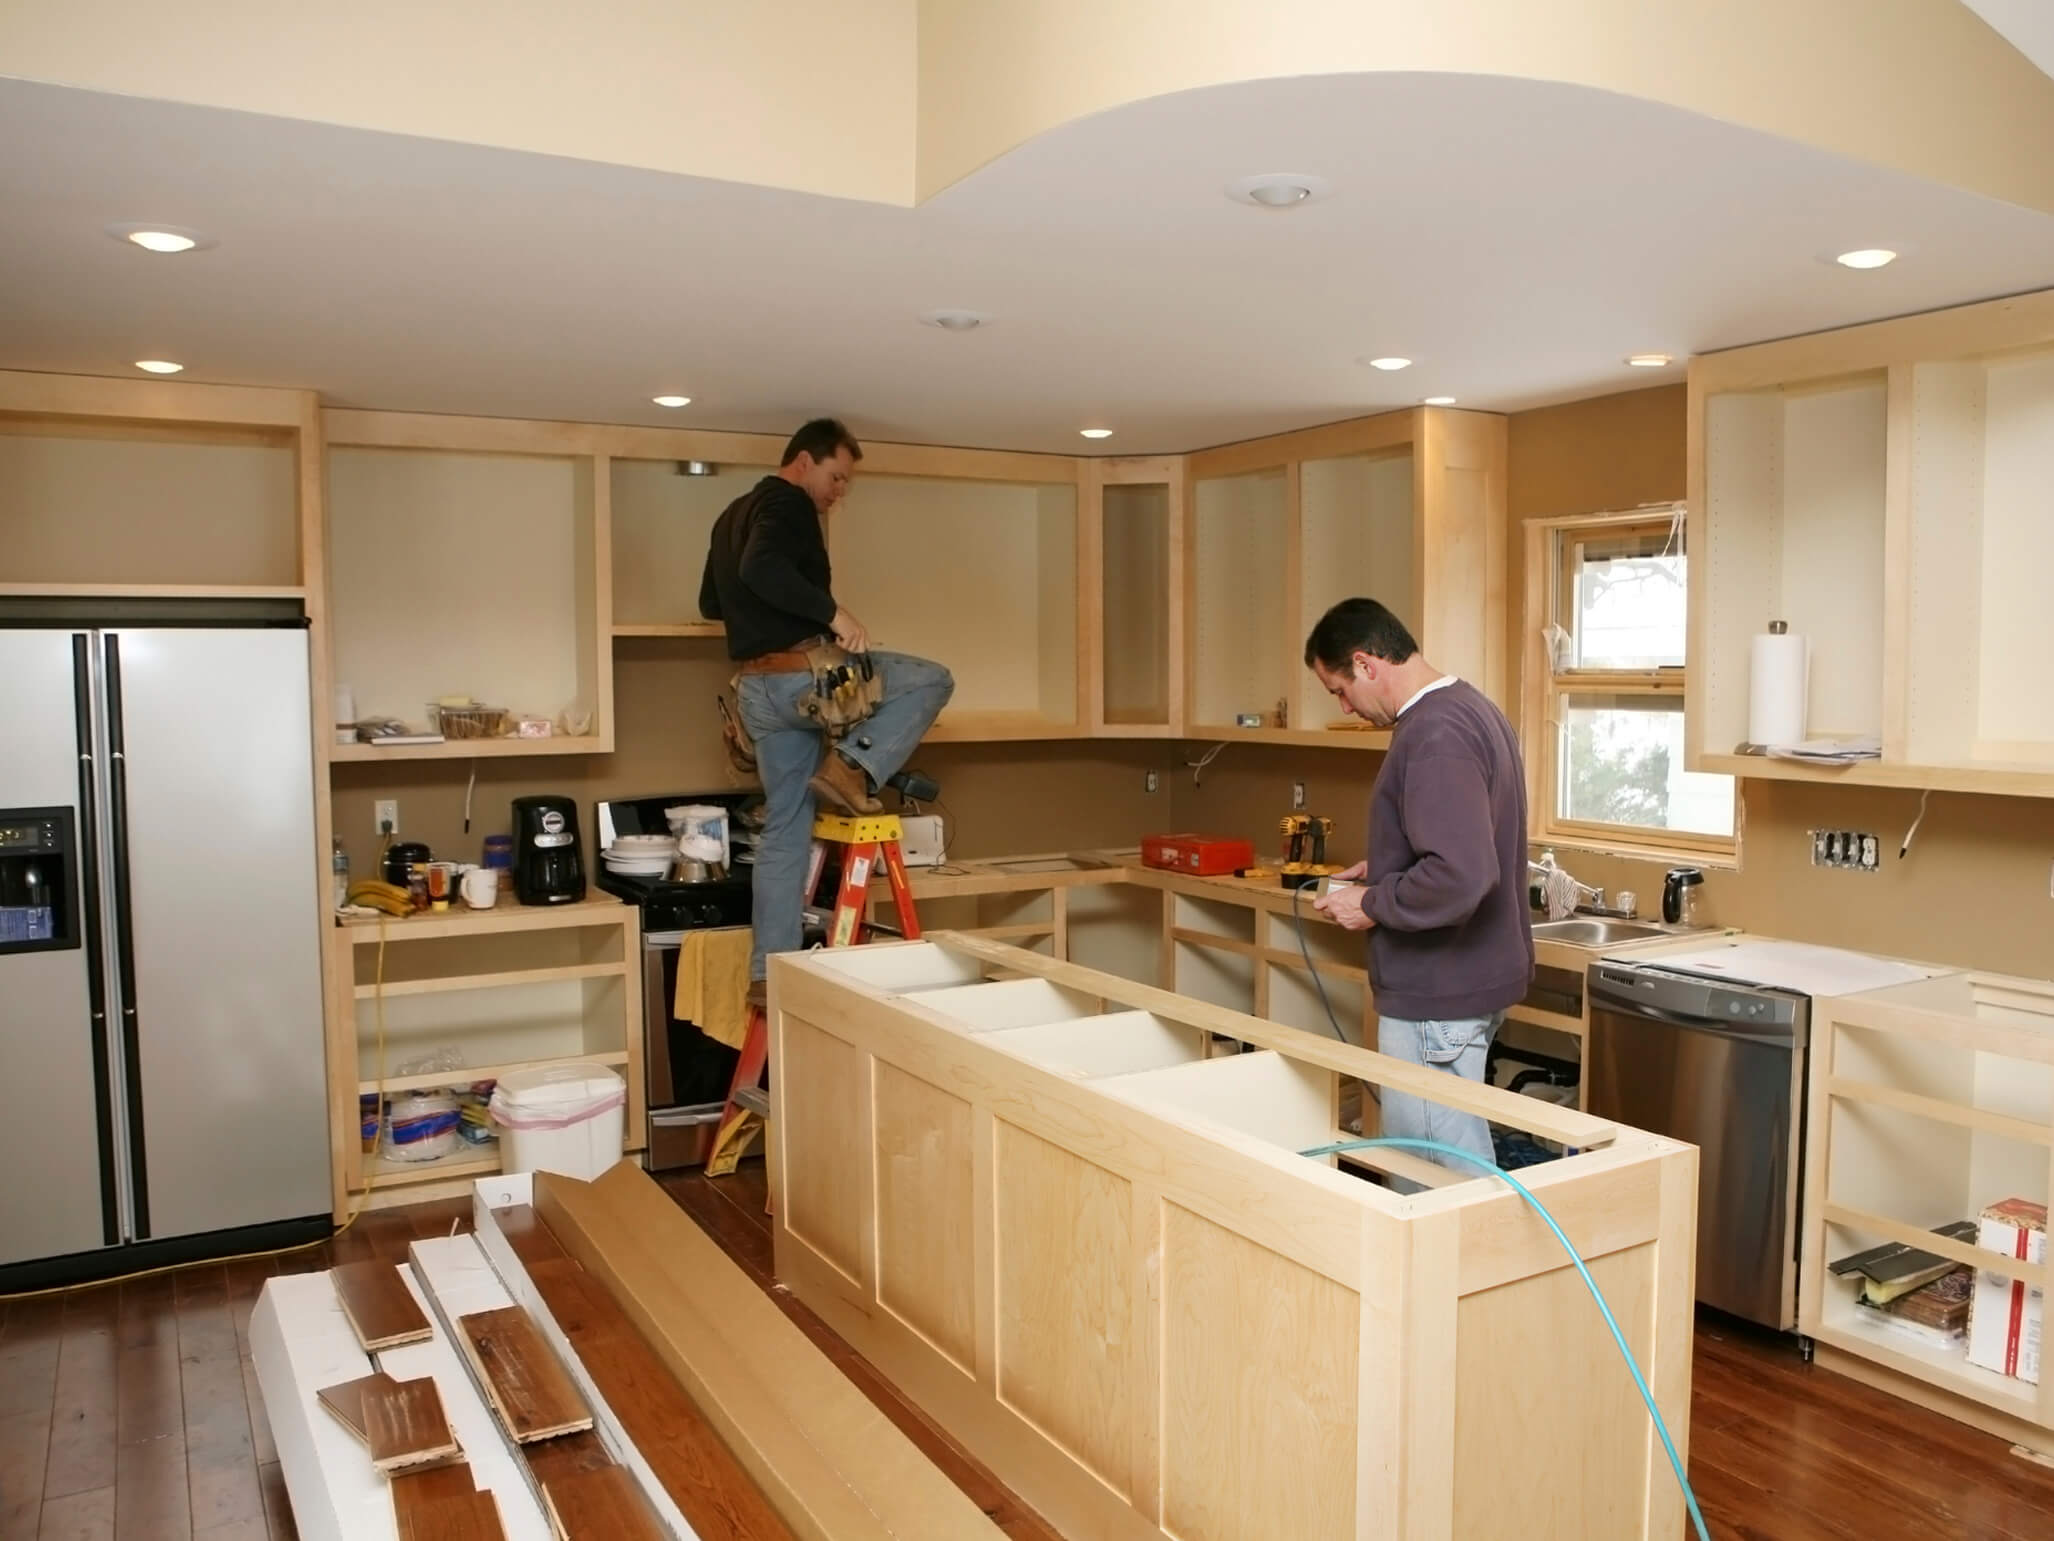 Washington home with contractors renovating kitchen